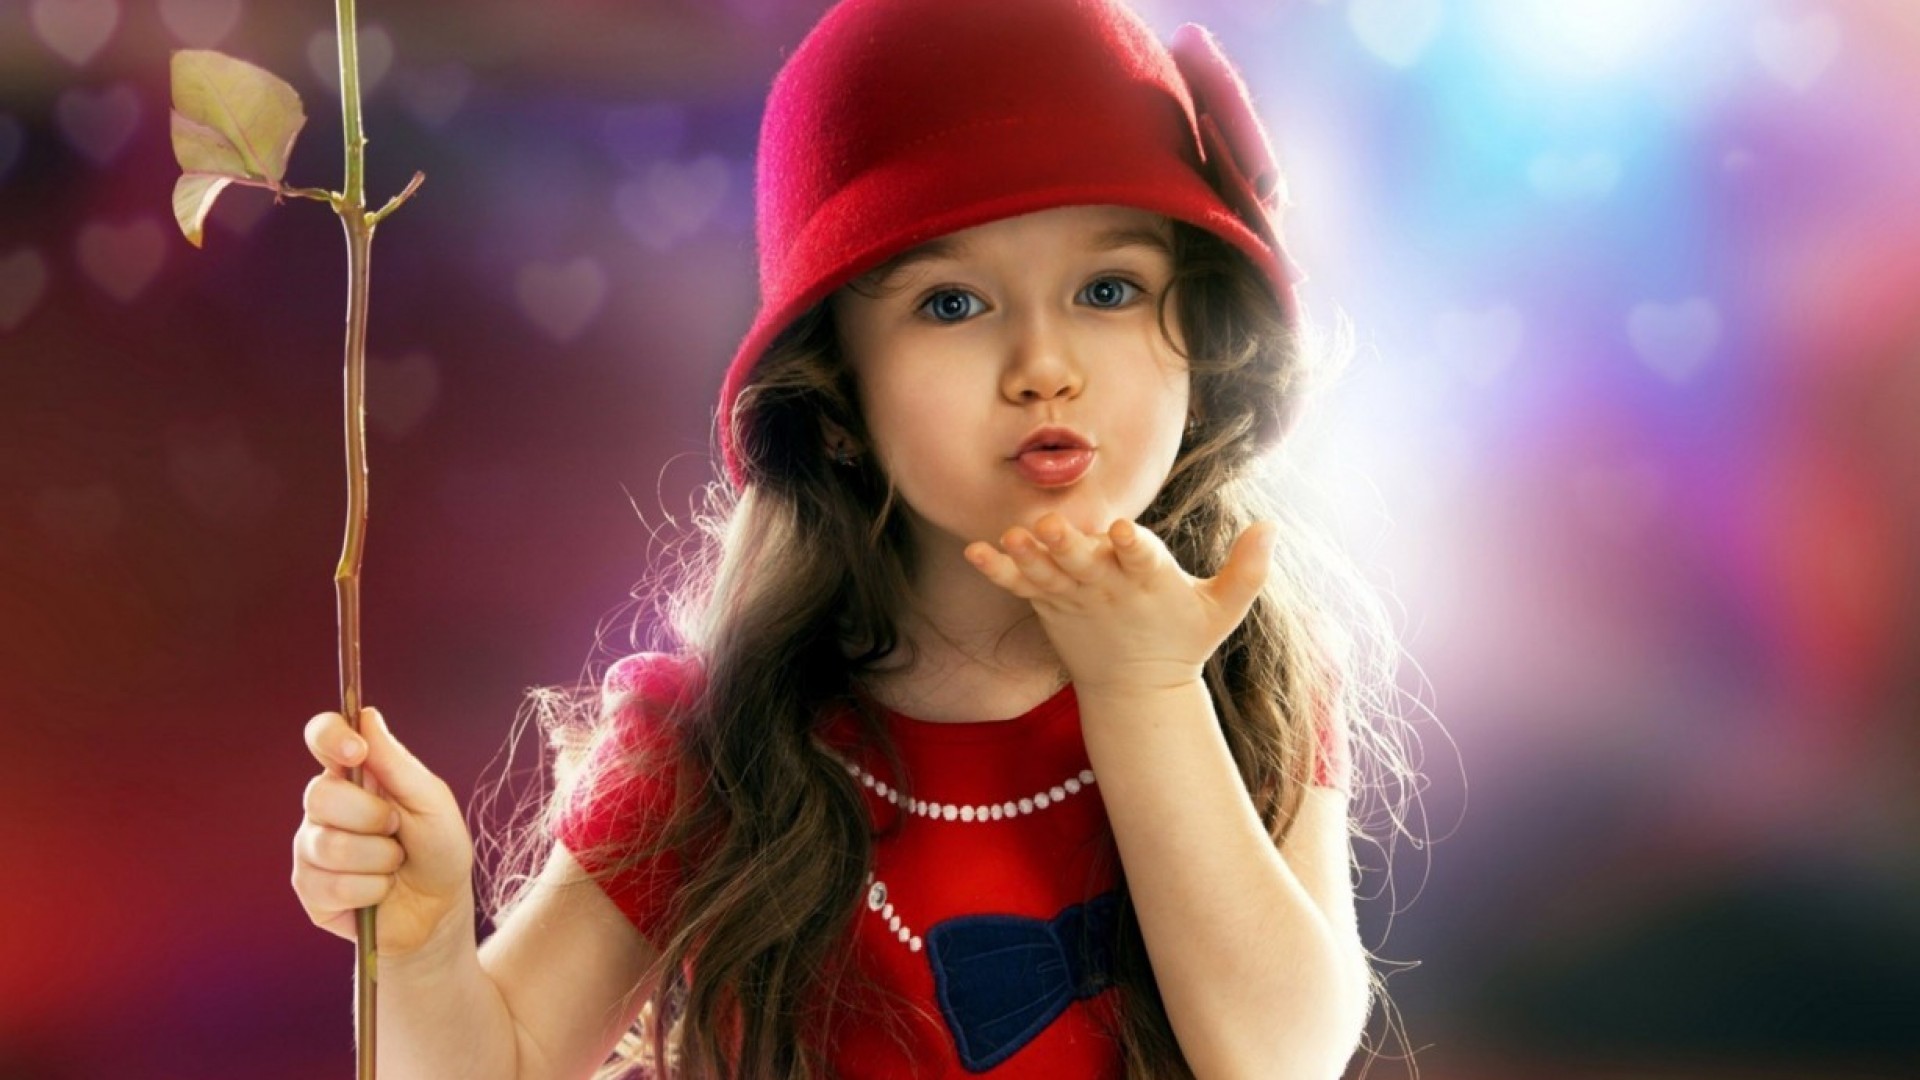 Undefined Baby Girl Images Wallpapers - Little Child - 1920x1080 Wallpaper  